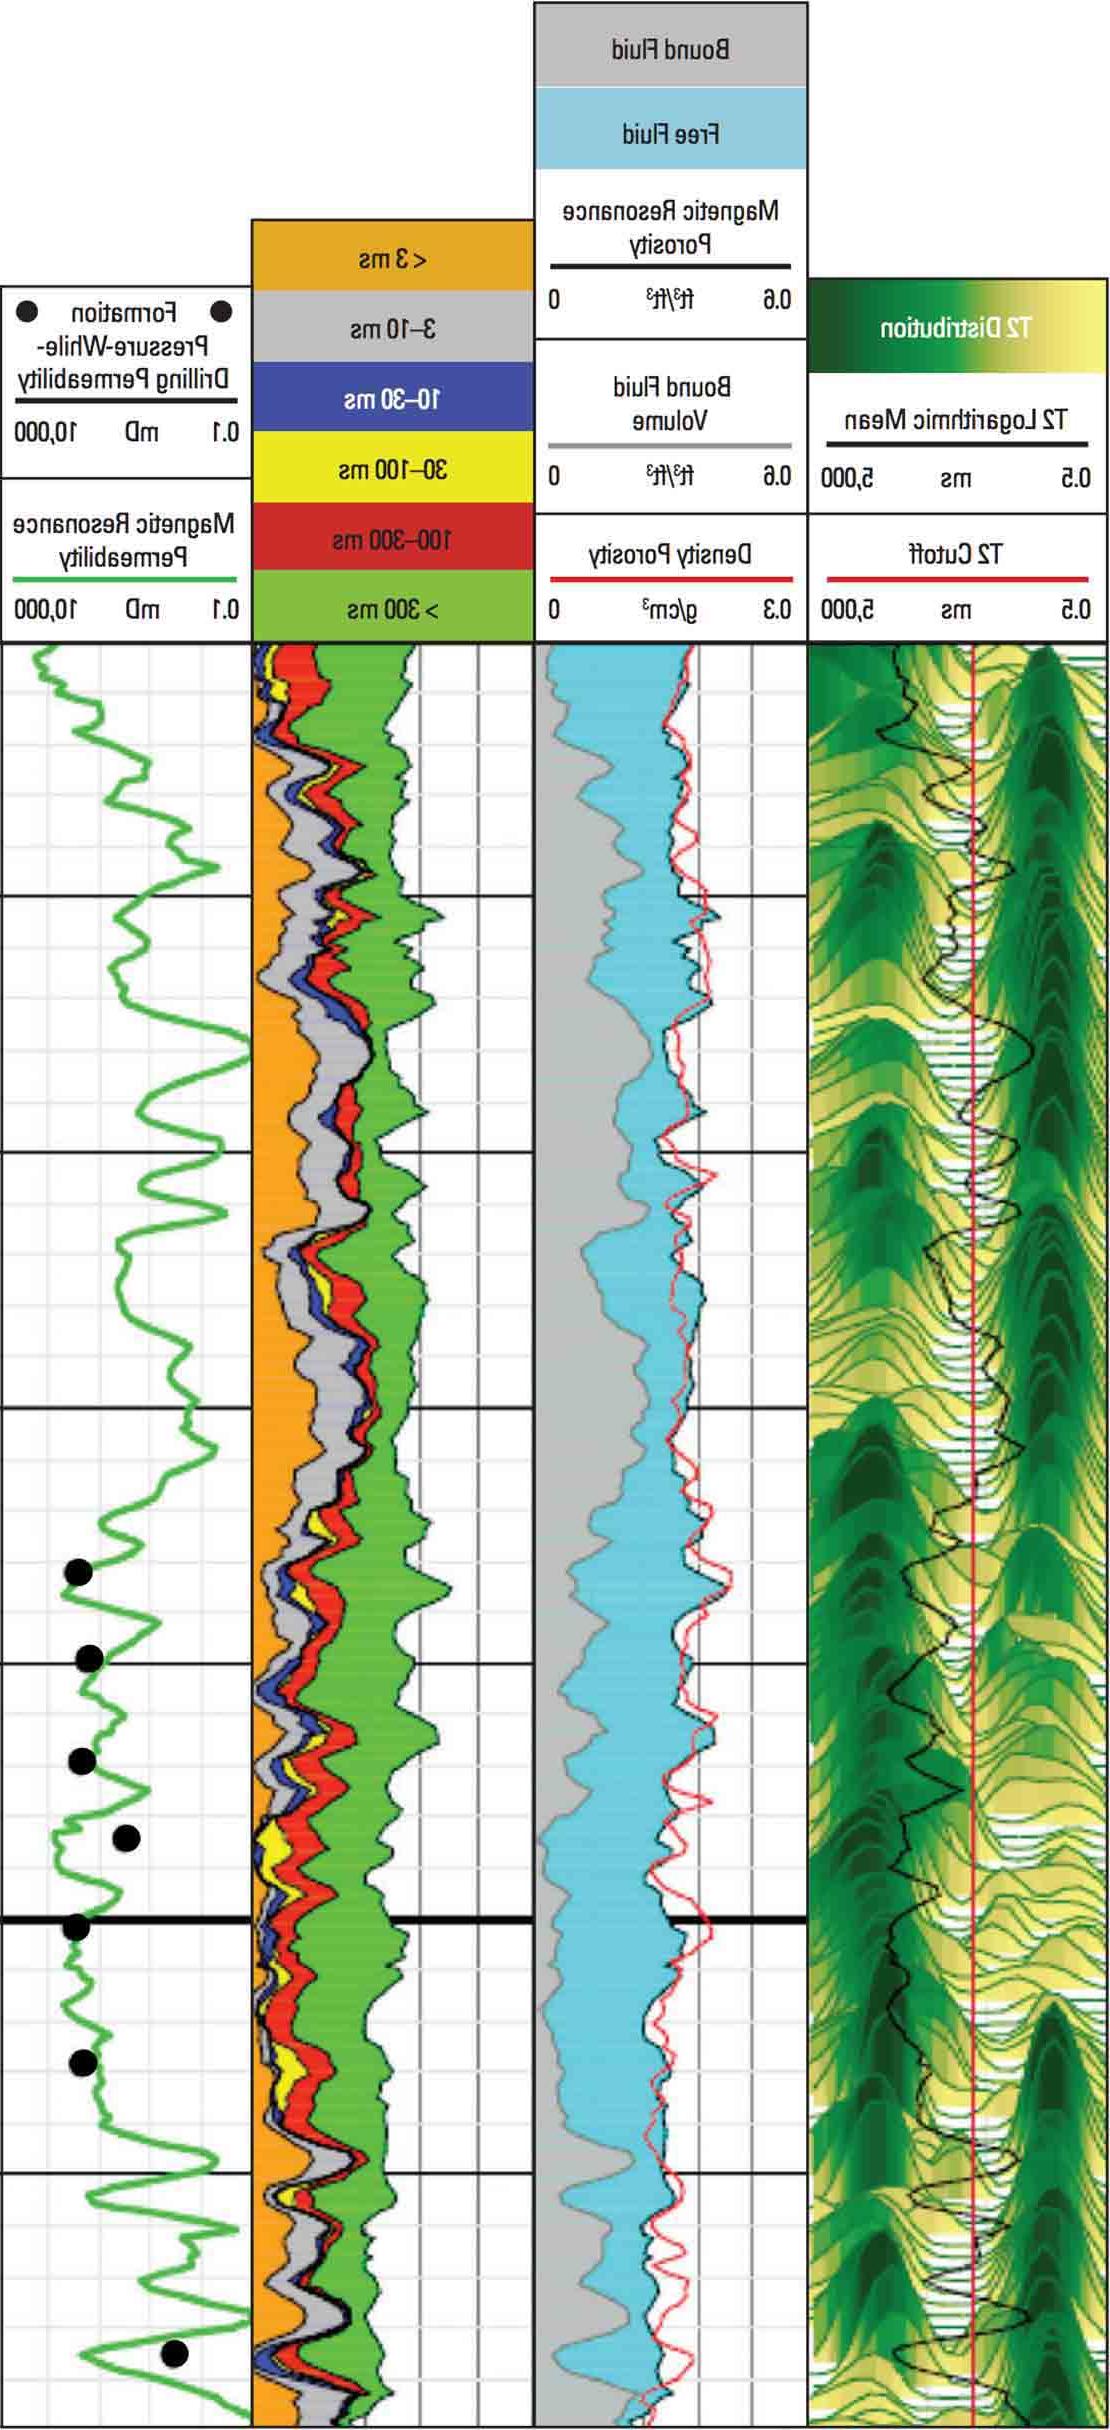 A log from the proVISION Plus Magnetic resonance-while-drilling service showing T2, fluid volumes, facies analysis, and permeability tracks